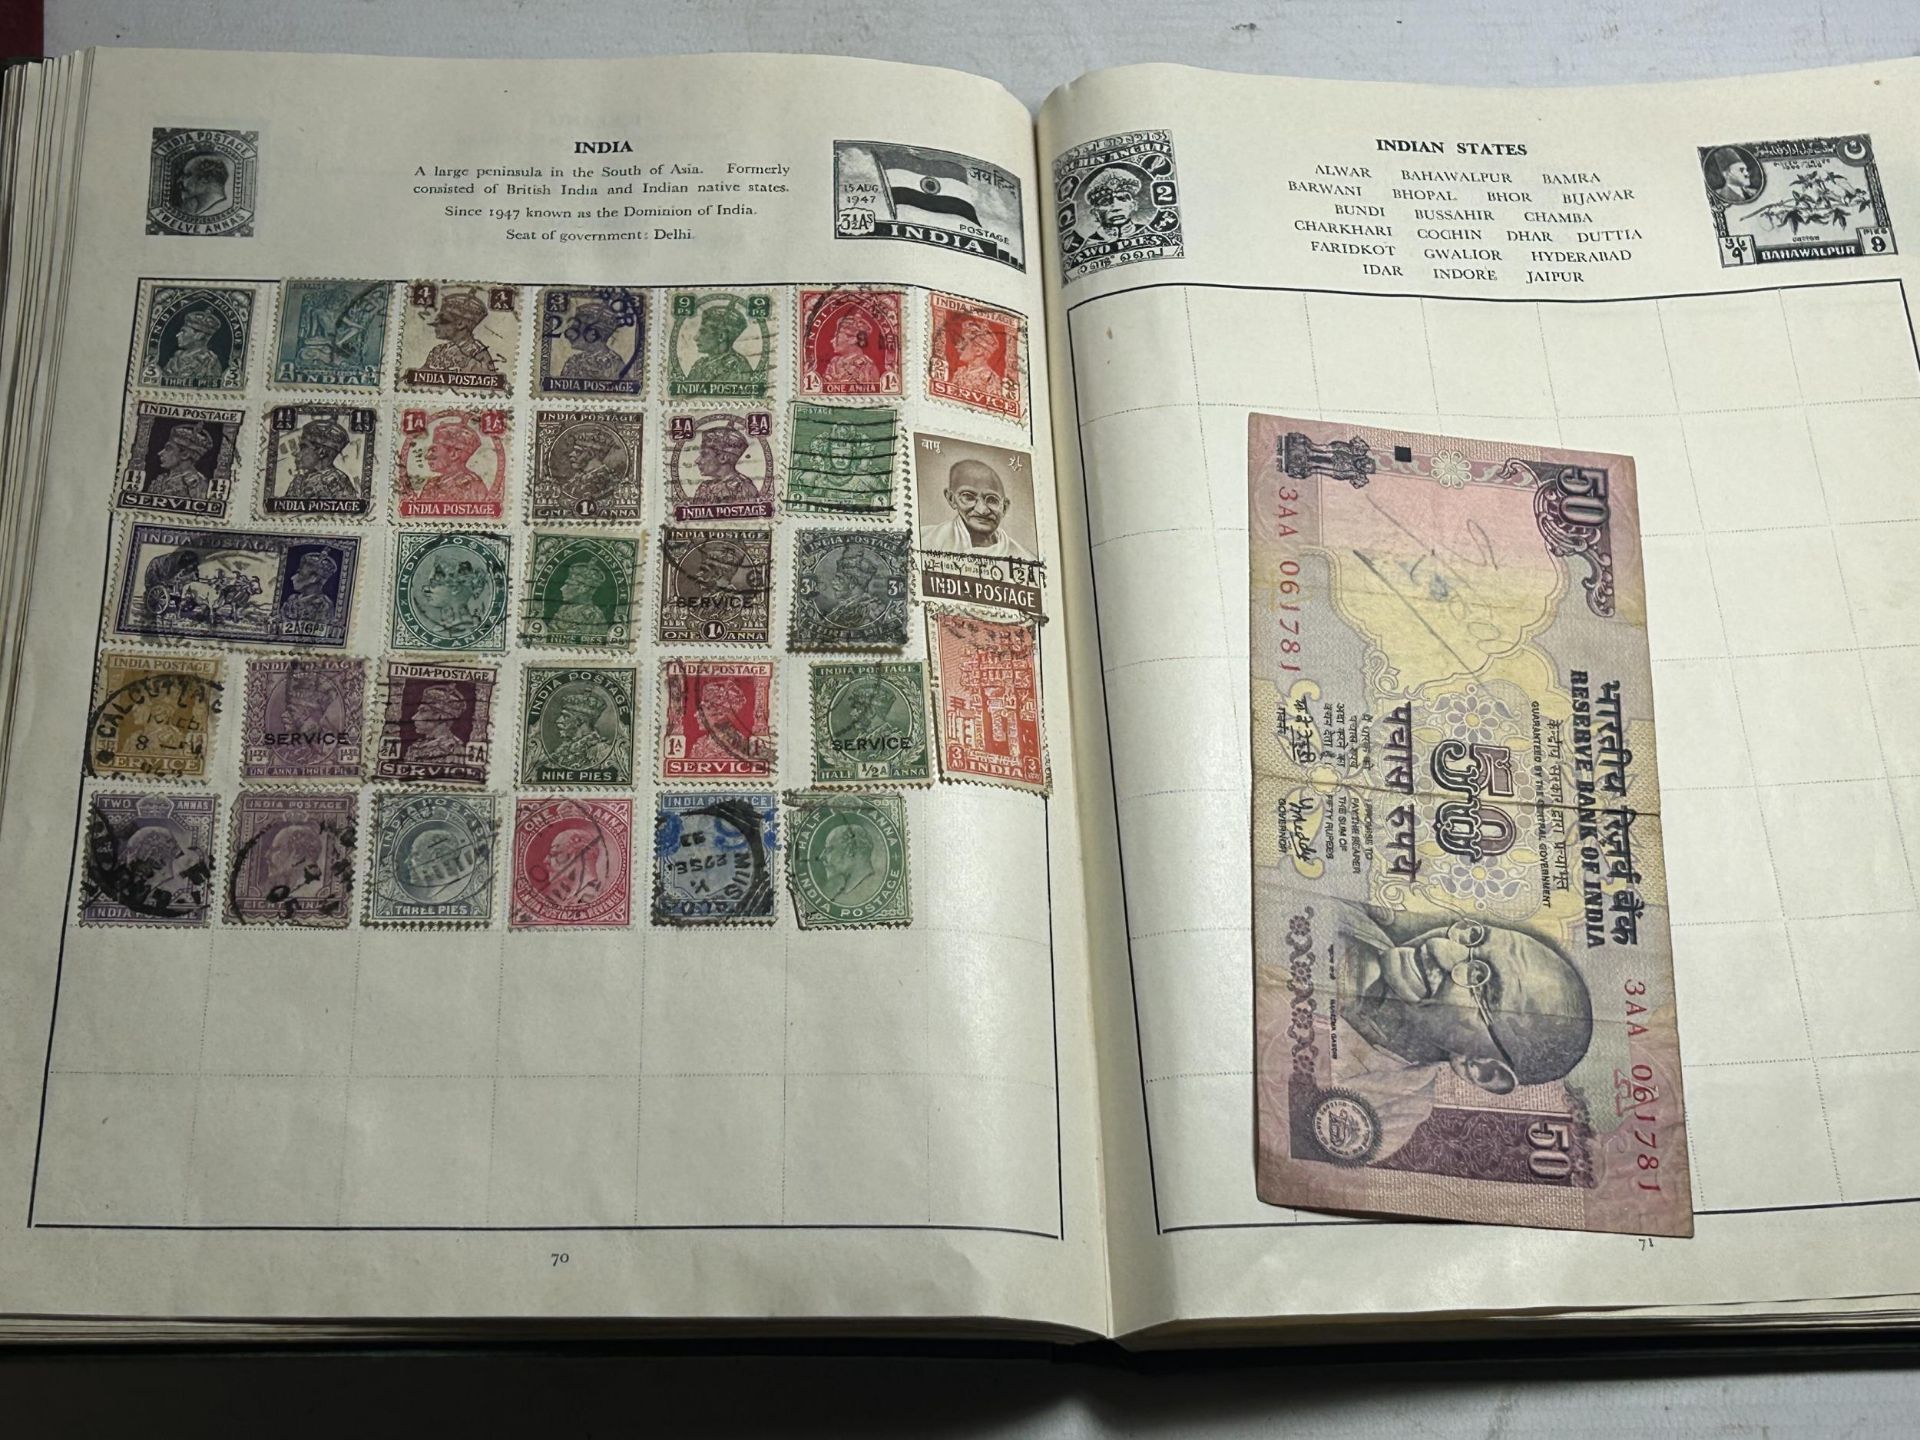 A CAVALIER STAMP ALBUM CONTAINING A COLLECTION OF VARIOUS WORLD STAMPS - Image 4 of 4